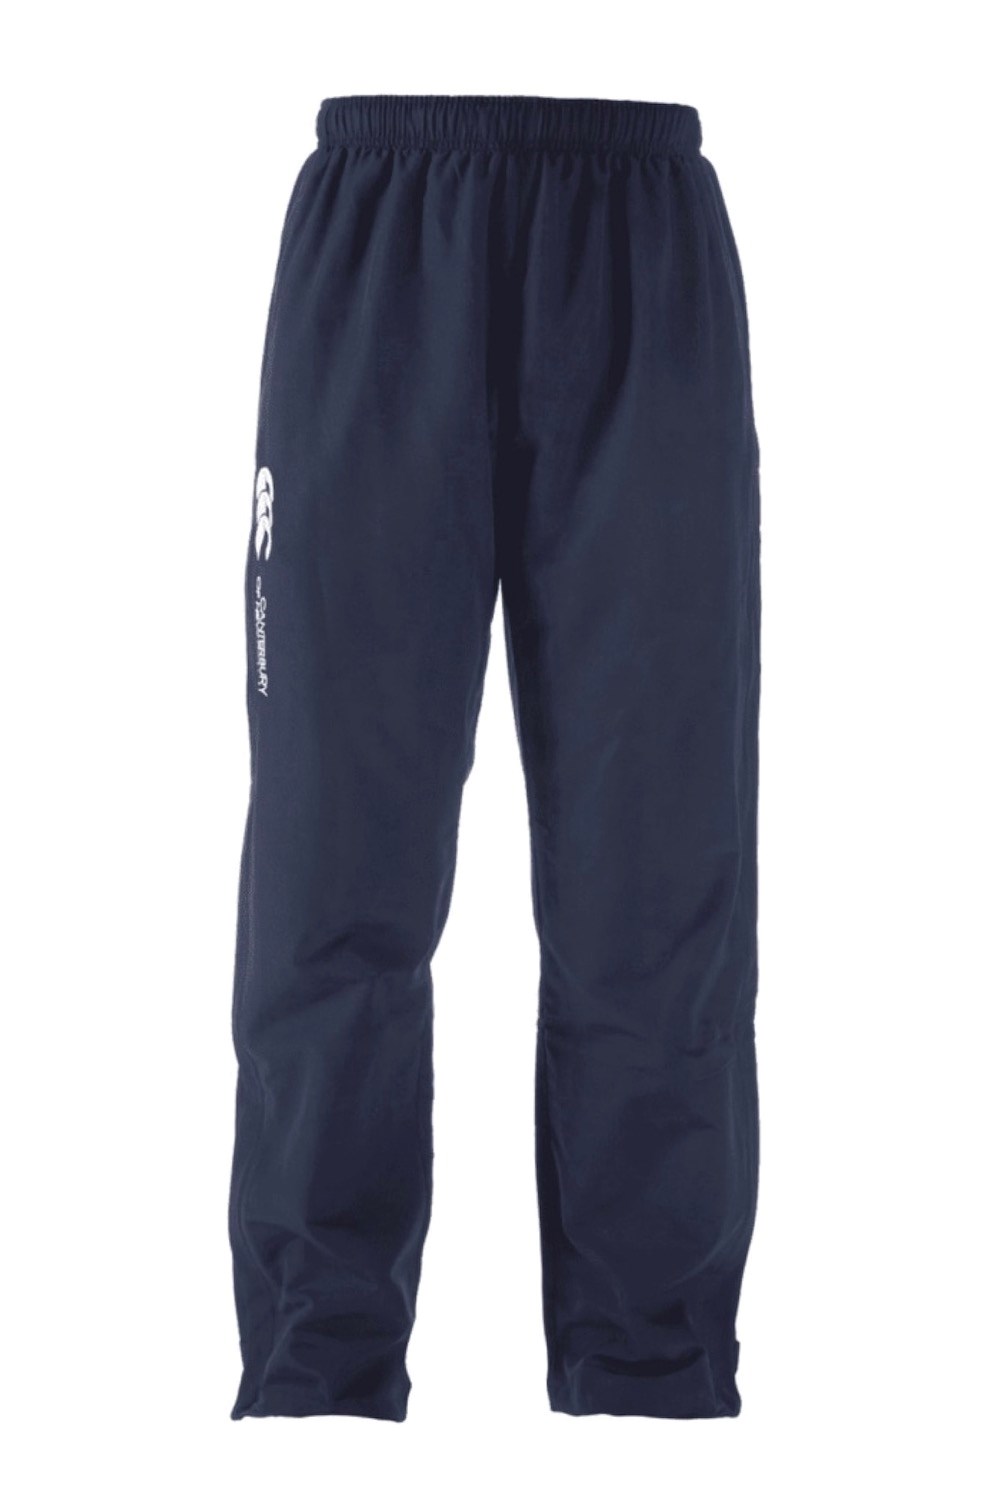 Cuffed Ankle Mens Tracksuit Bottoms -